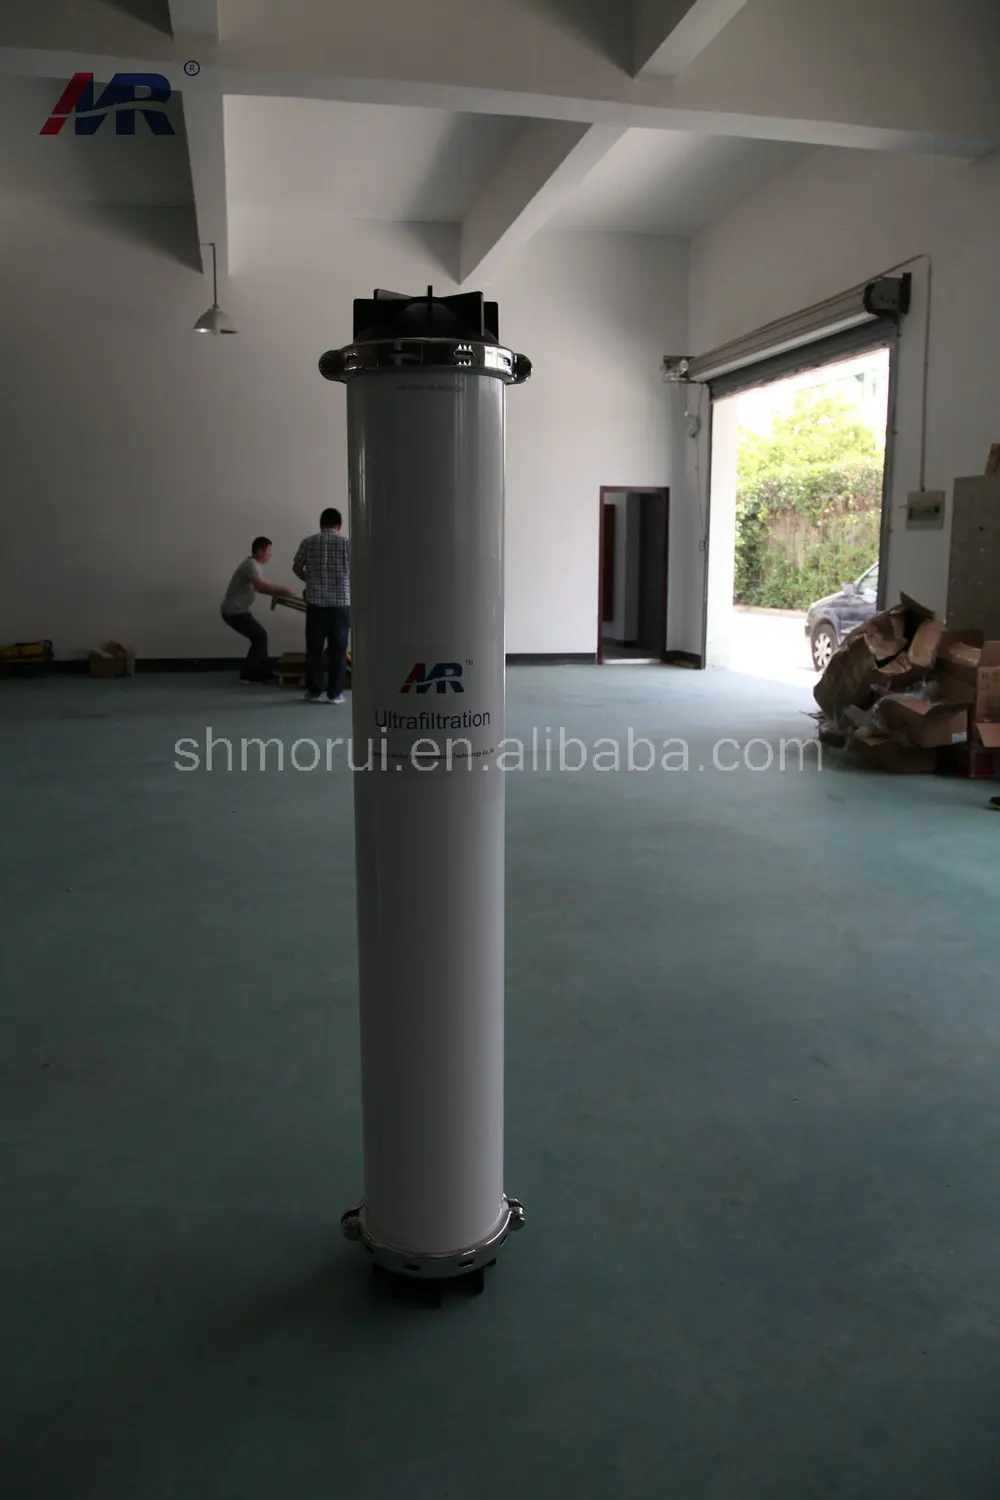 Ultrafiltration membrane / waste water treatment plant / water system